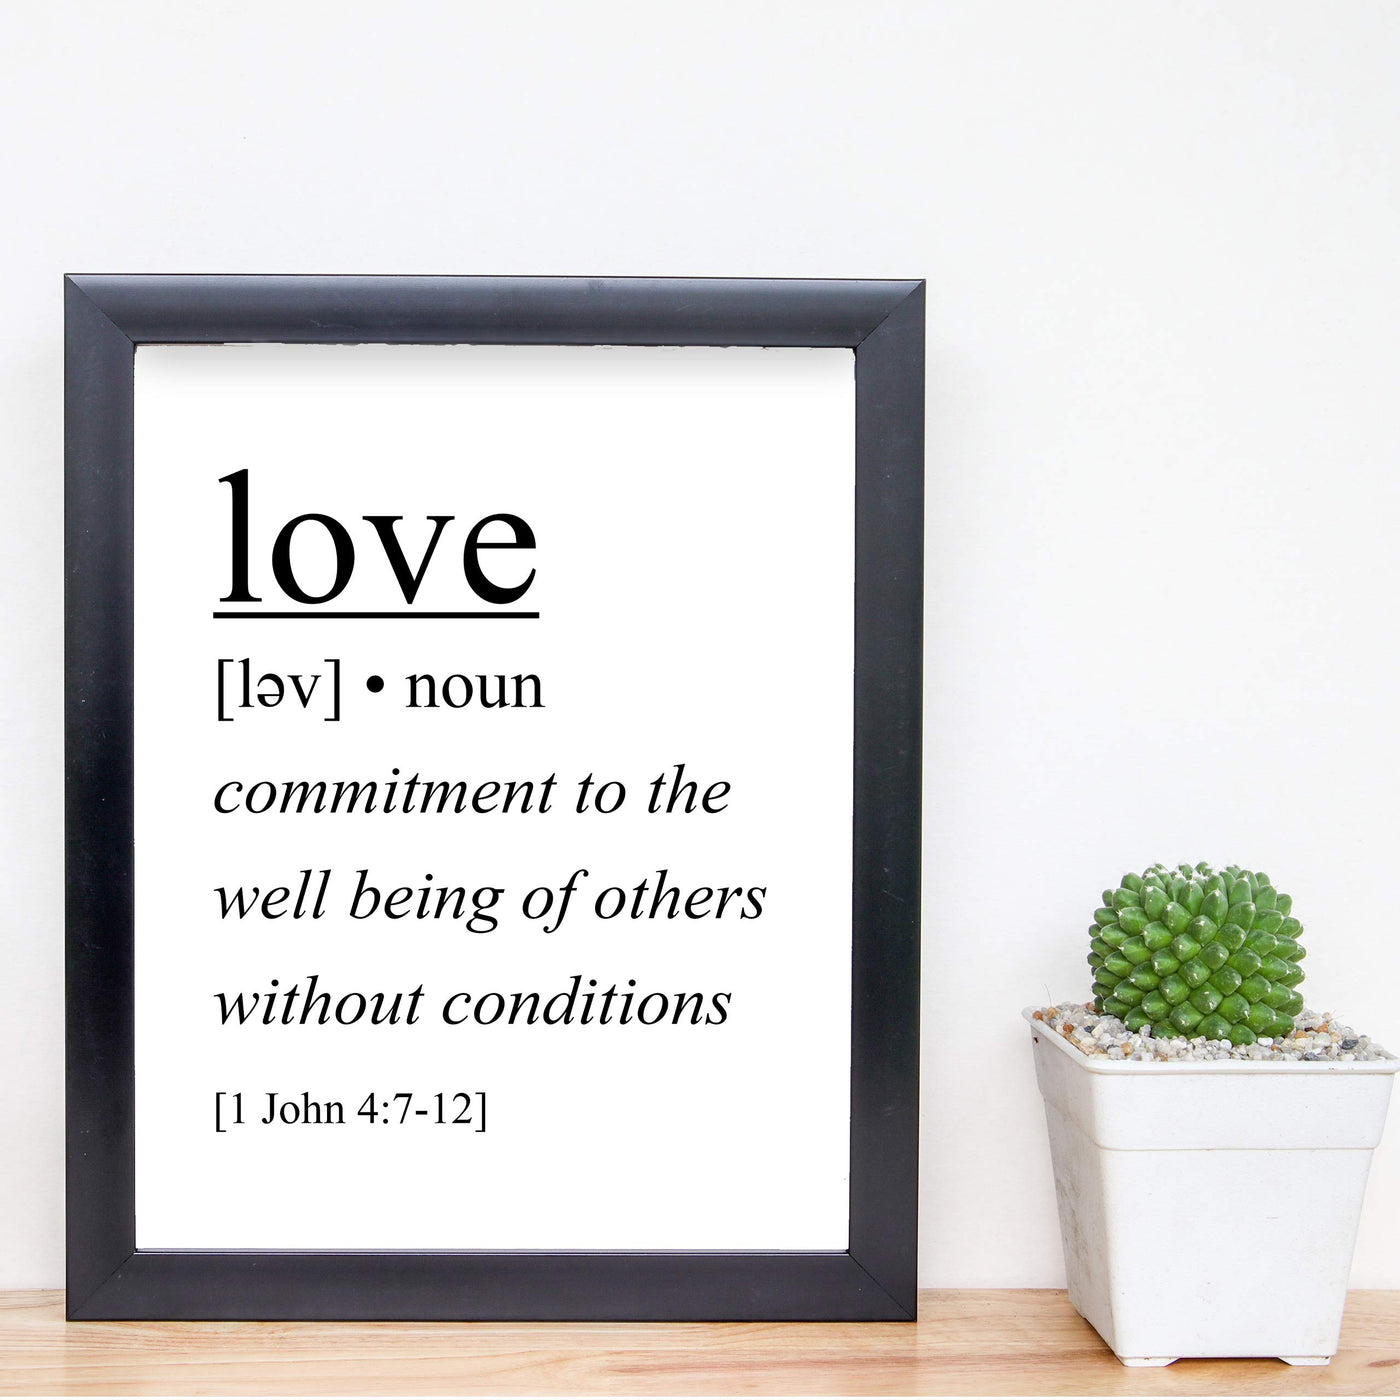 Love-Commitment to the Well Being of Others-1 John 4:7-12 -Bible Verse Wall Art Sign-8 x 10" Scripture Poster Print-Ready to Frame. Religious Home-Office-Church Decor. Perfect Christian Gift!